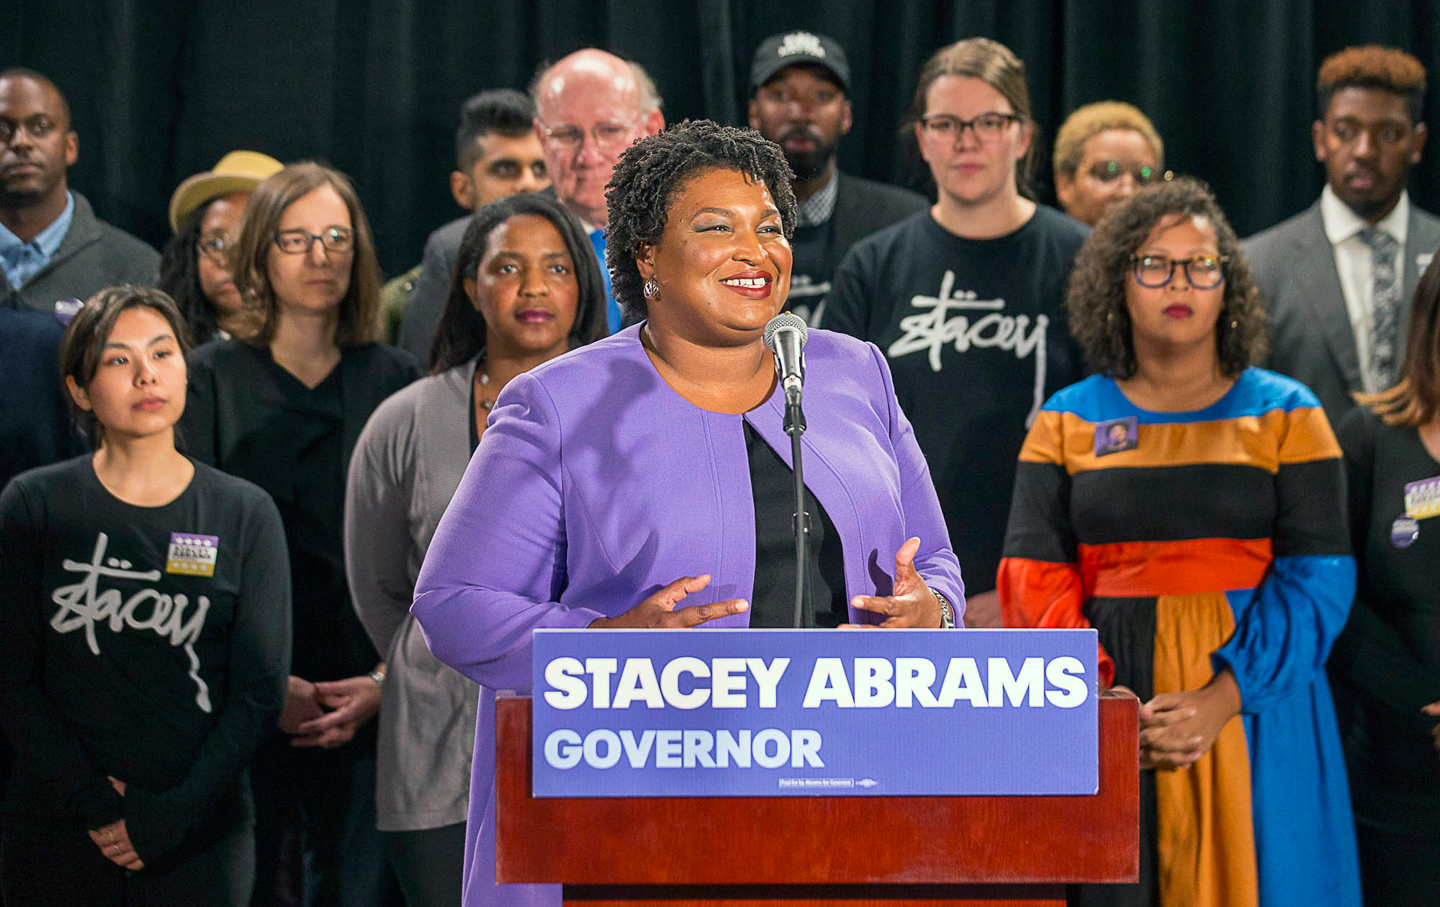 stacey-abrams-concession-ap-img.jpg